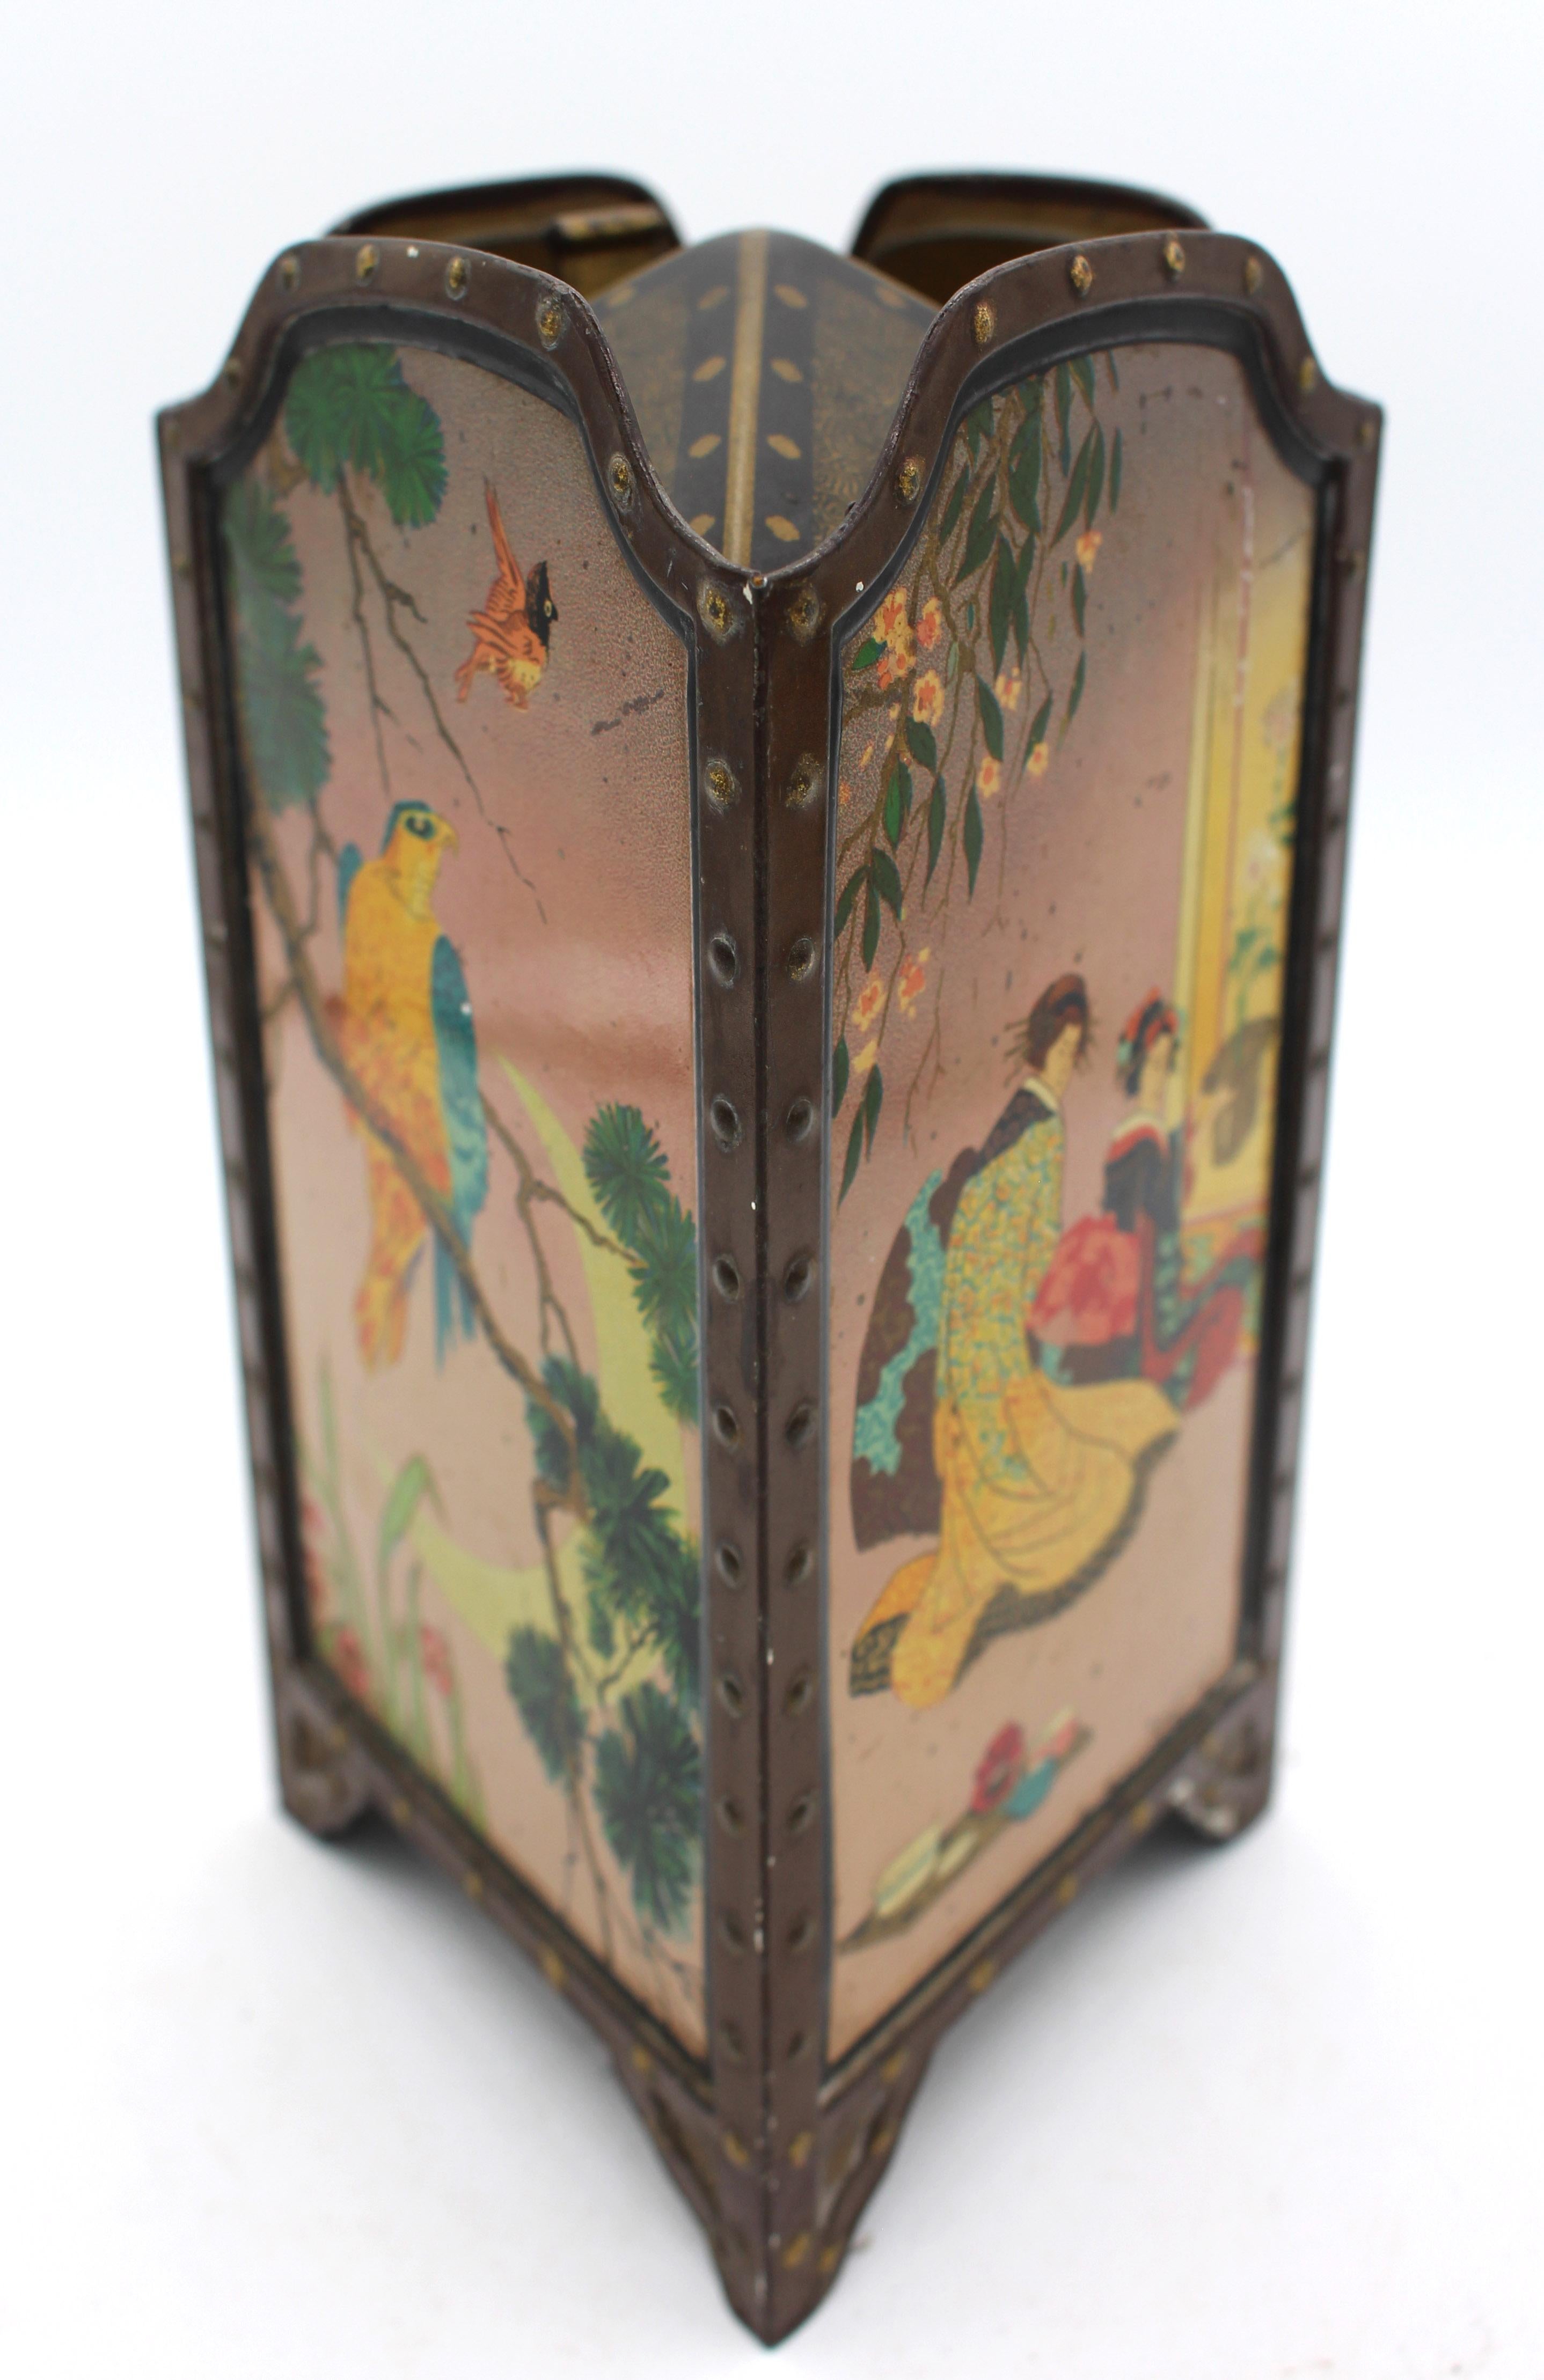 1913 Huntley & Palmers Japanese Screen Form Biscuit Tin Box In Good Condition For Sale In Chapel Hill, NC